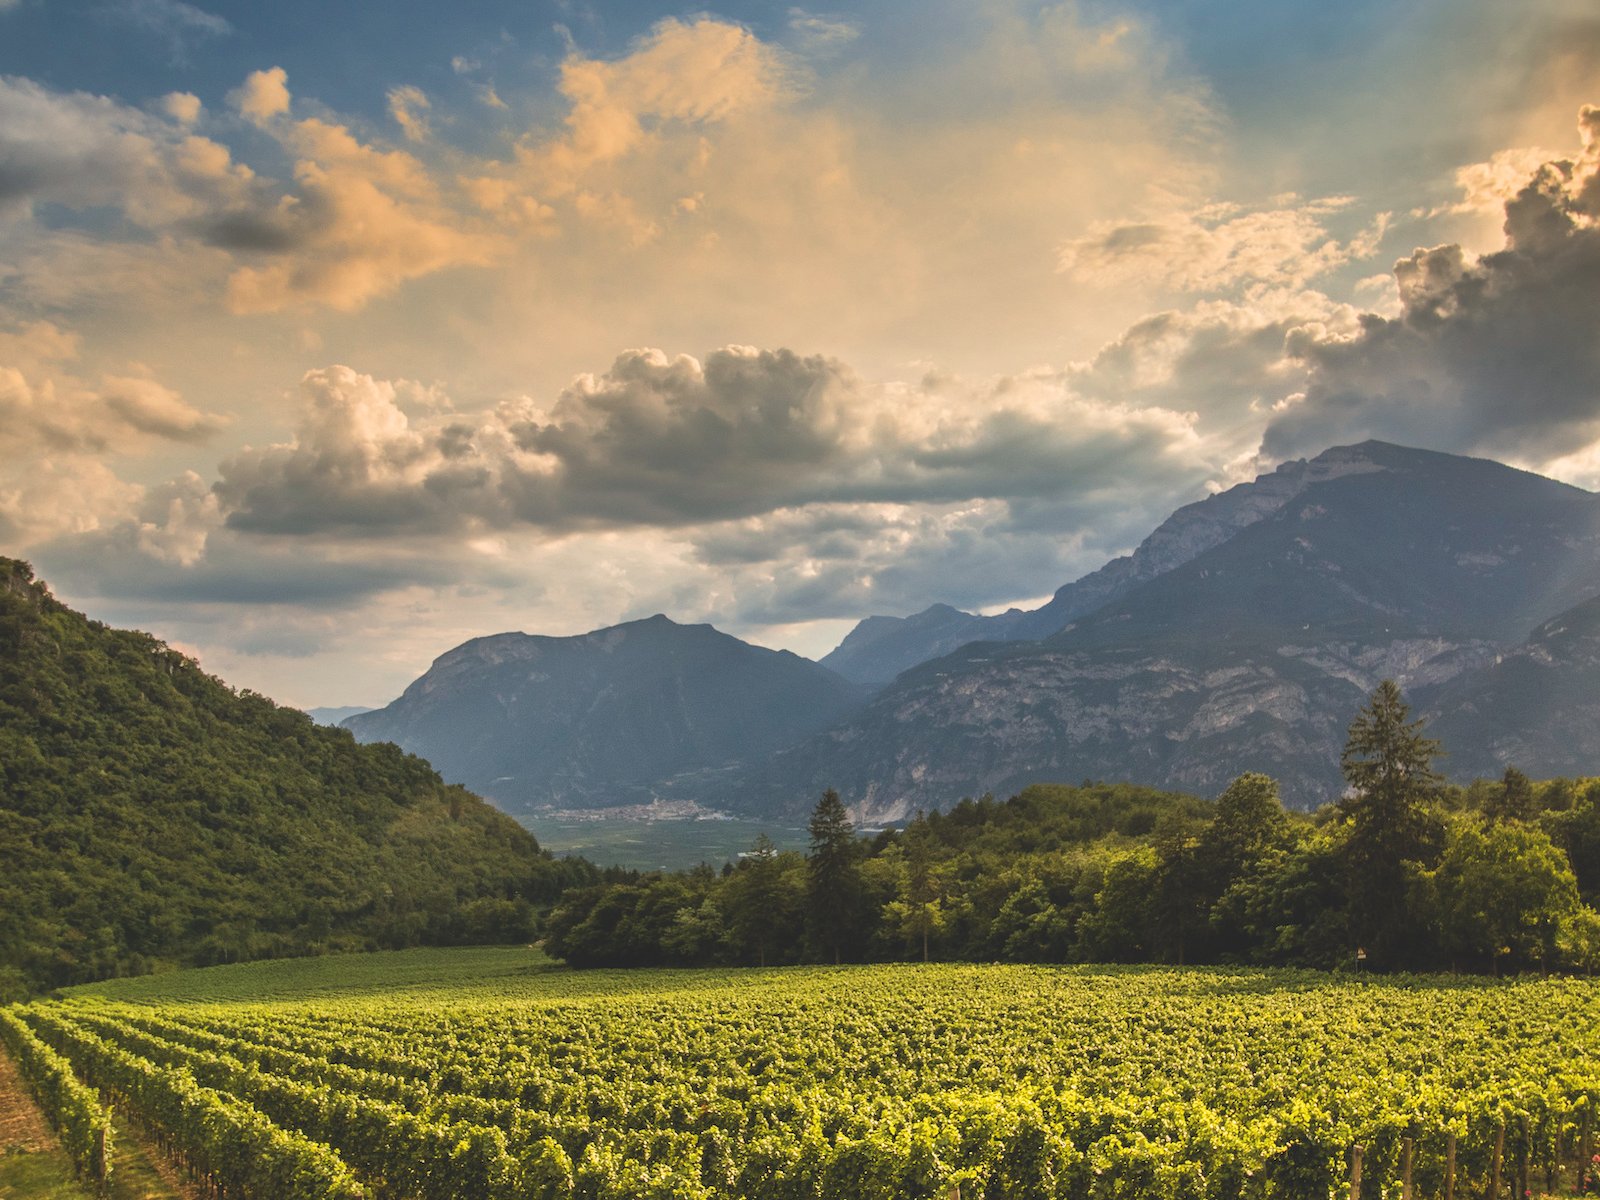 Vineyards in the Trentino region,&nbsp;with the Alps in the distance,&nbsp;produce grapes for Trentodoc sparkling wines.